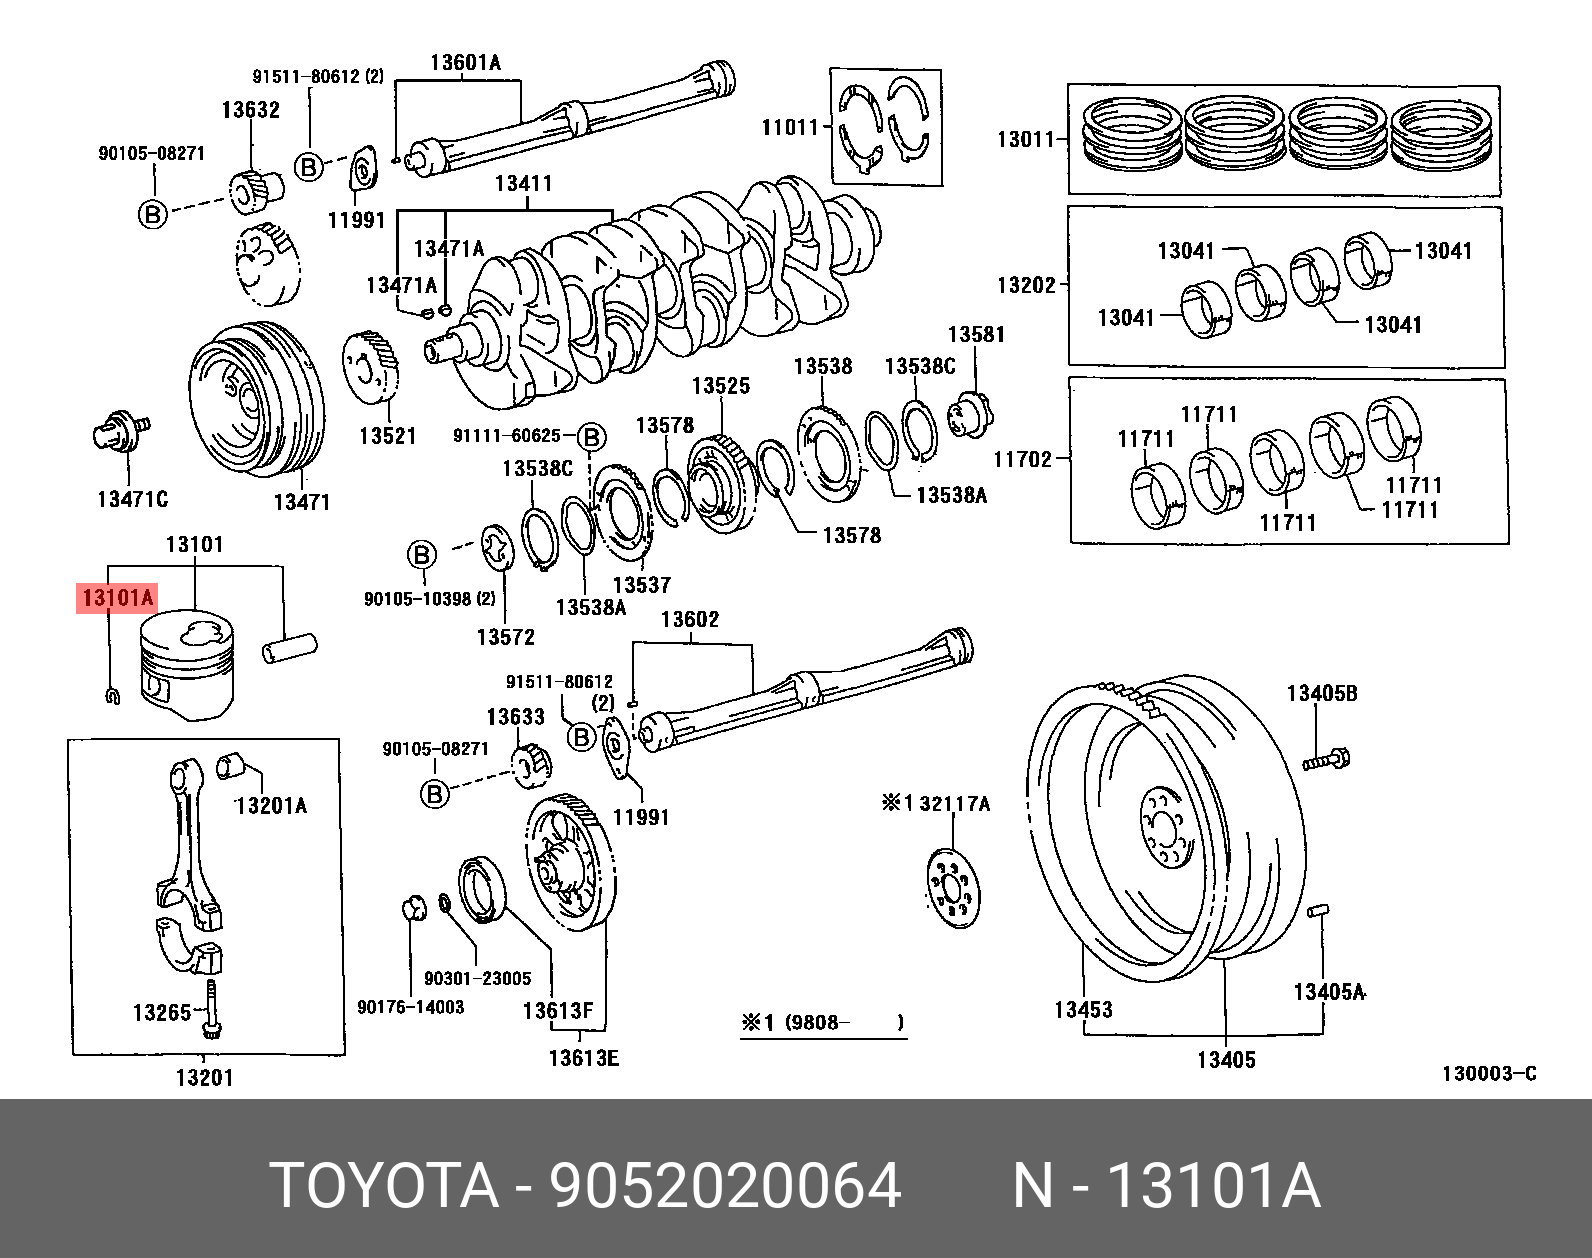 PRIUS 201511 -, RING, HOLE SNAP(FOR PISTON PIN)